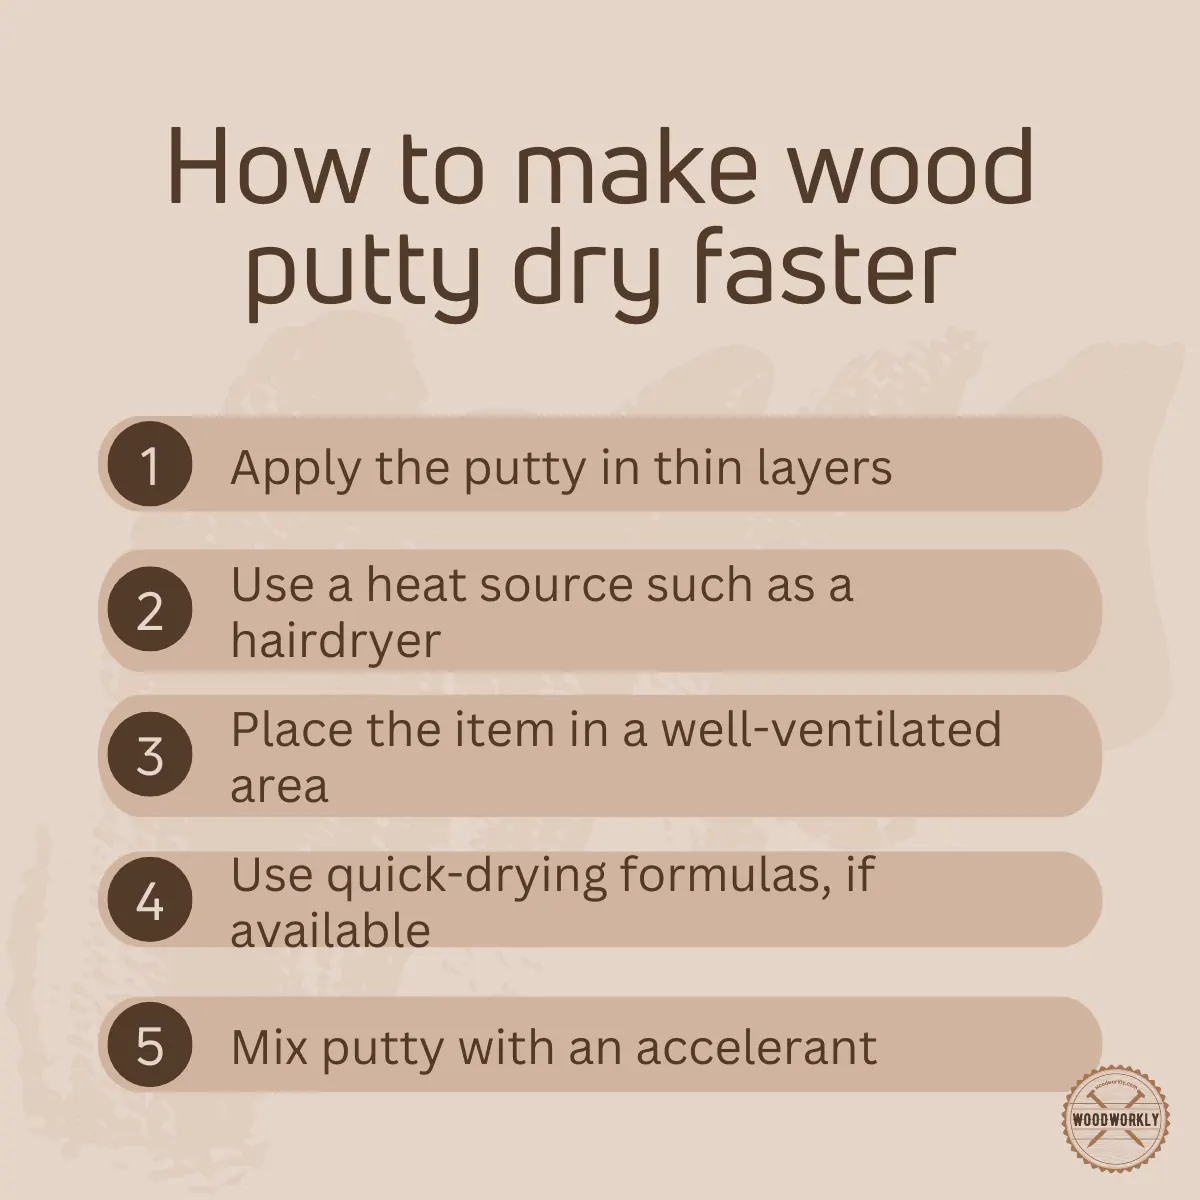 How to make wood putty dry faster